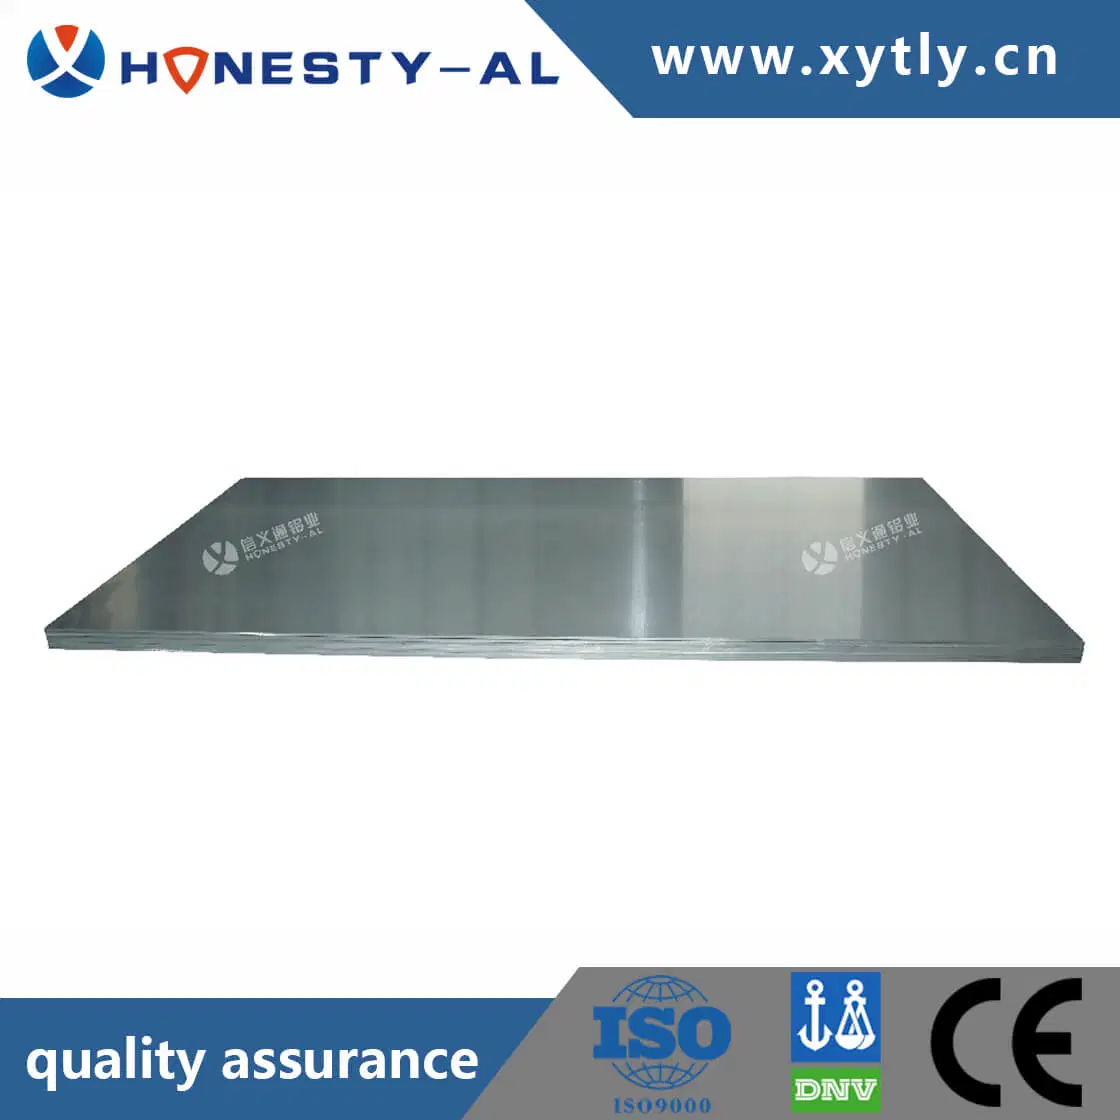 Honesty Aluminum High Quality 3003 3004 4mm 5mm 10mm 20mm Thickness Aluminium Plate Sheet Chinese Supplier for Billboards Kitchen Utensils Cookware Food Packing